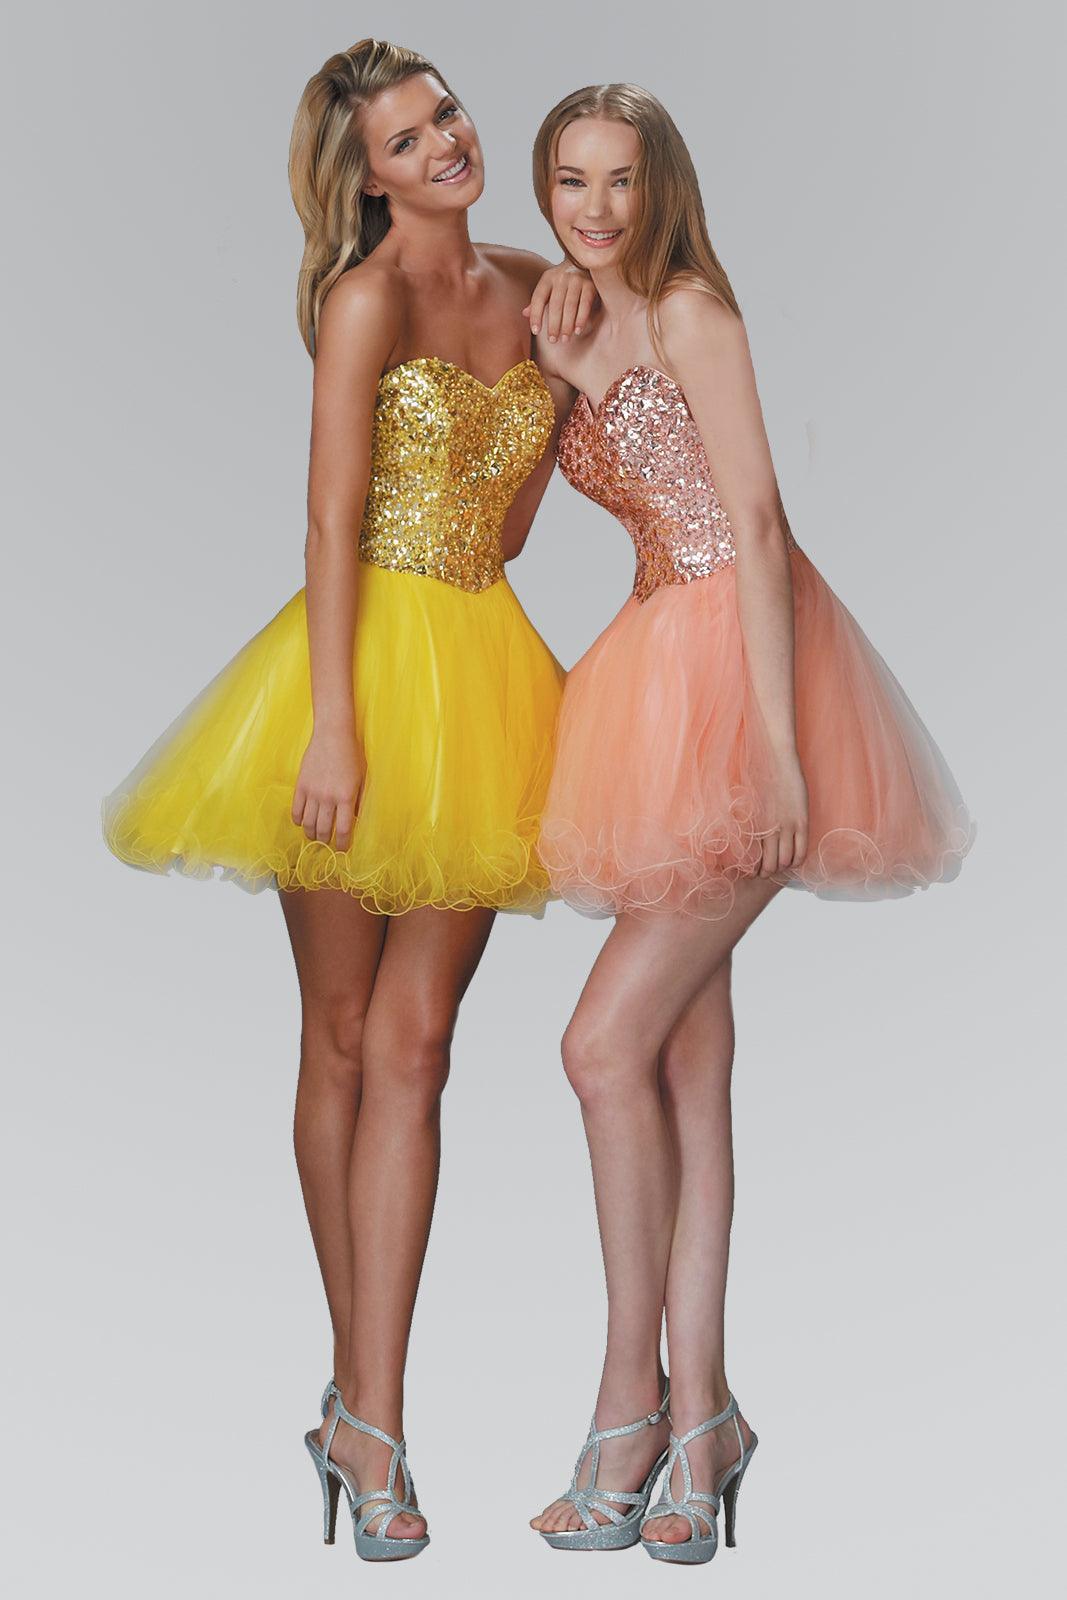 Strapless Tulle Short Prom Dress - The Dress Outlet